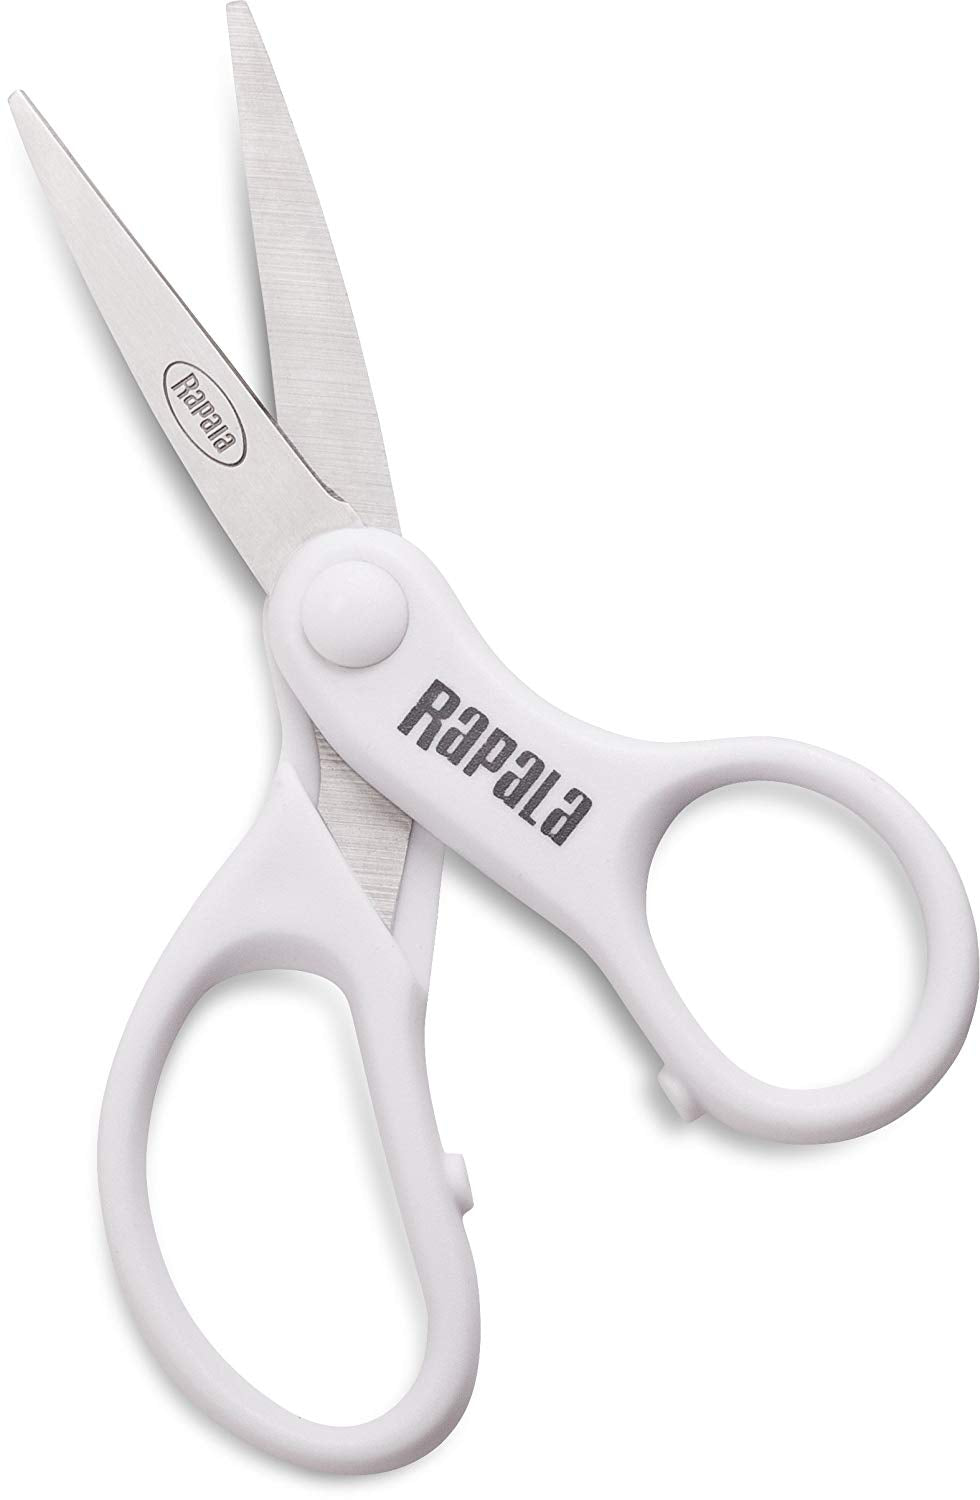 Rapala Stainless Steel Super Line Scissors for Braided Fishing Line